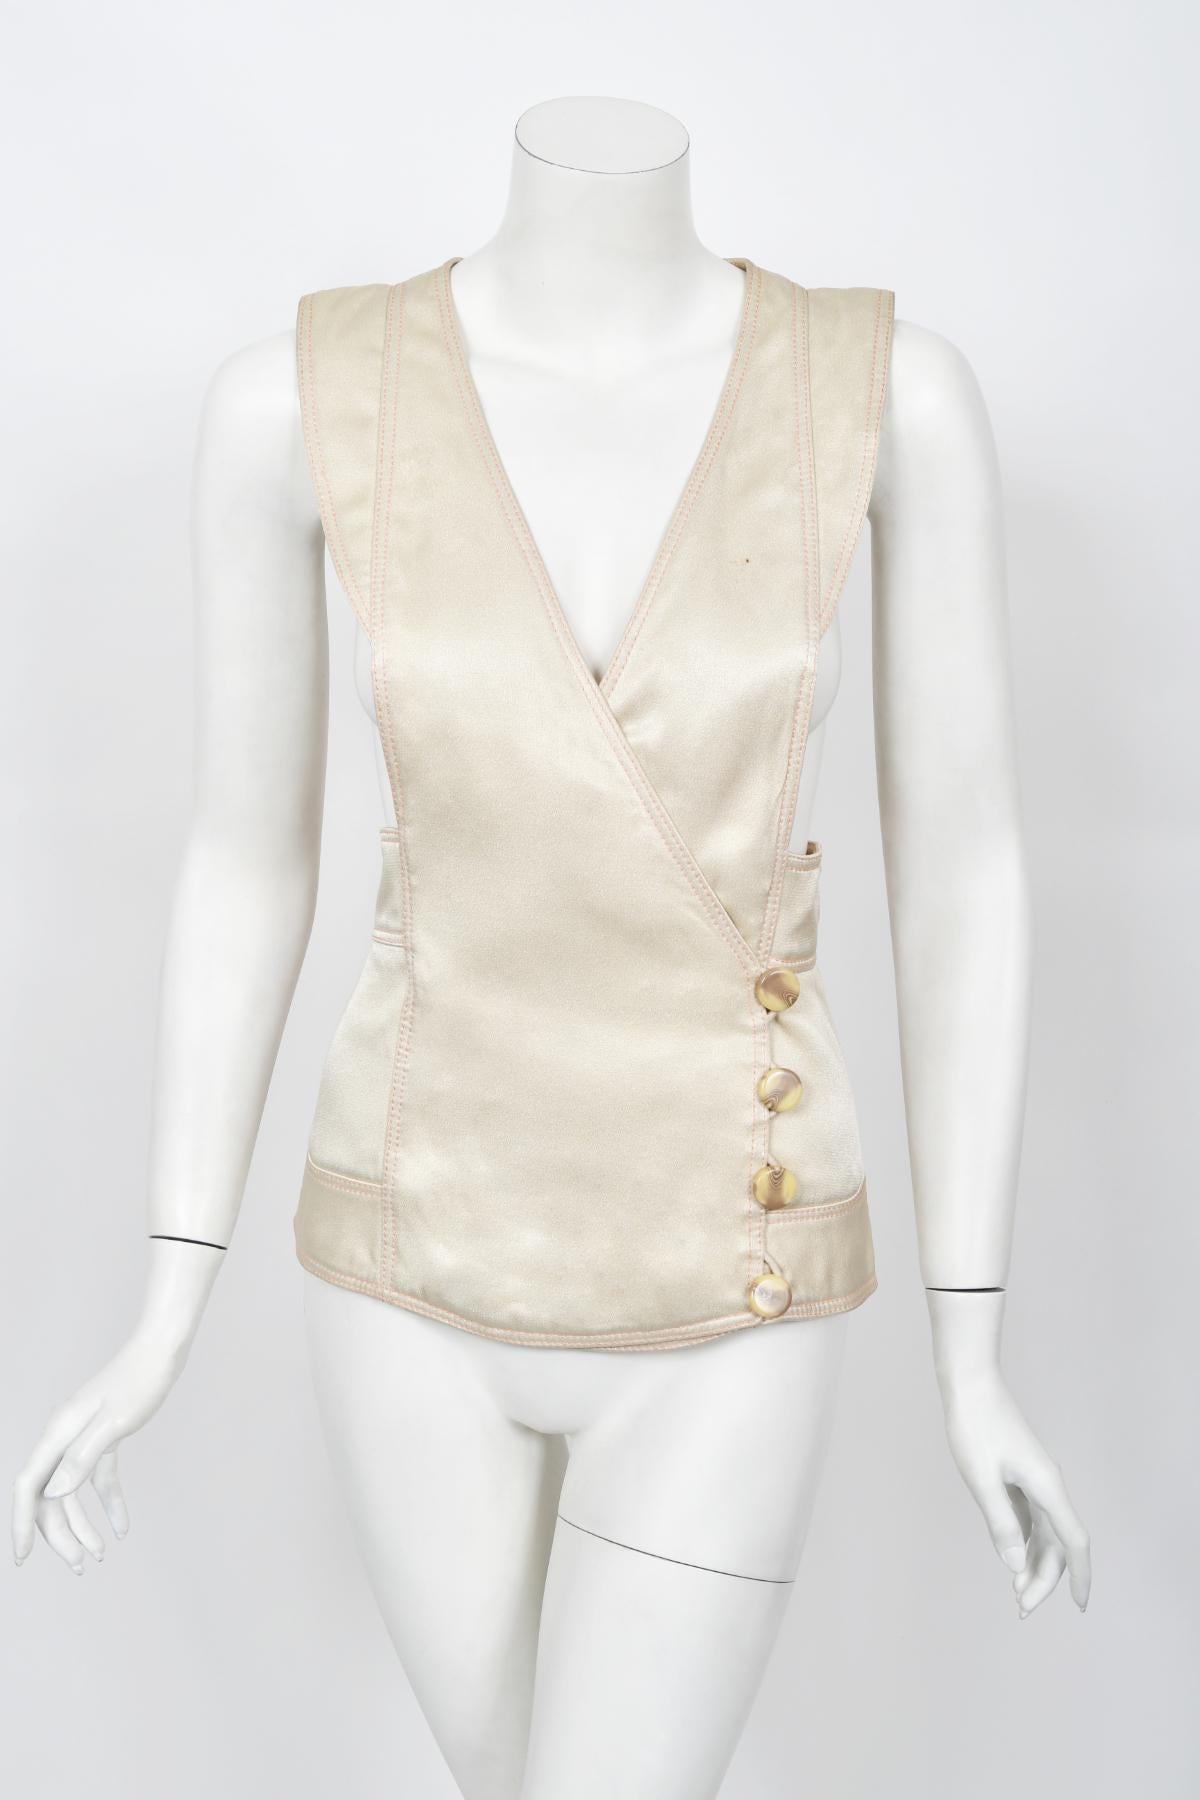 Vintage 1970's Bill Gibb Couture Embroidered Satin Mutton-Sleeve Jacket & Vest  For Sale 3